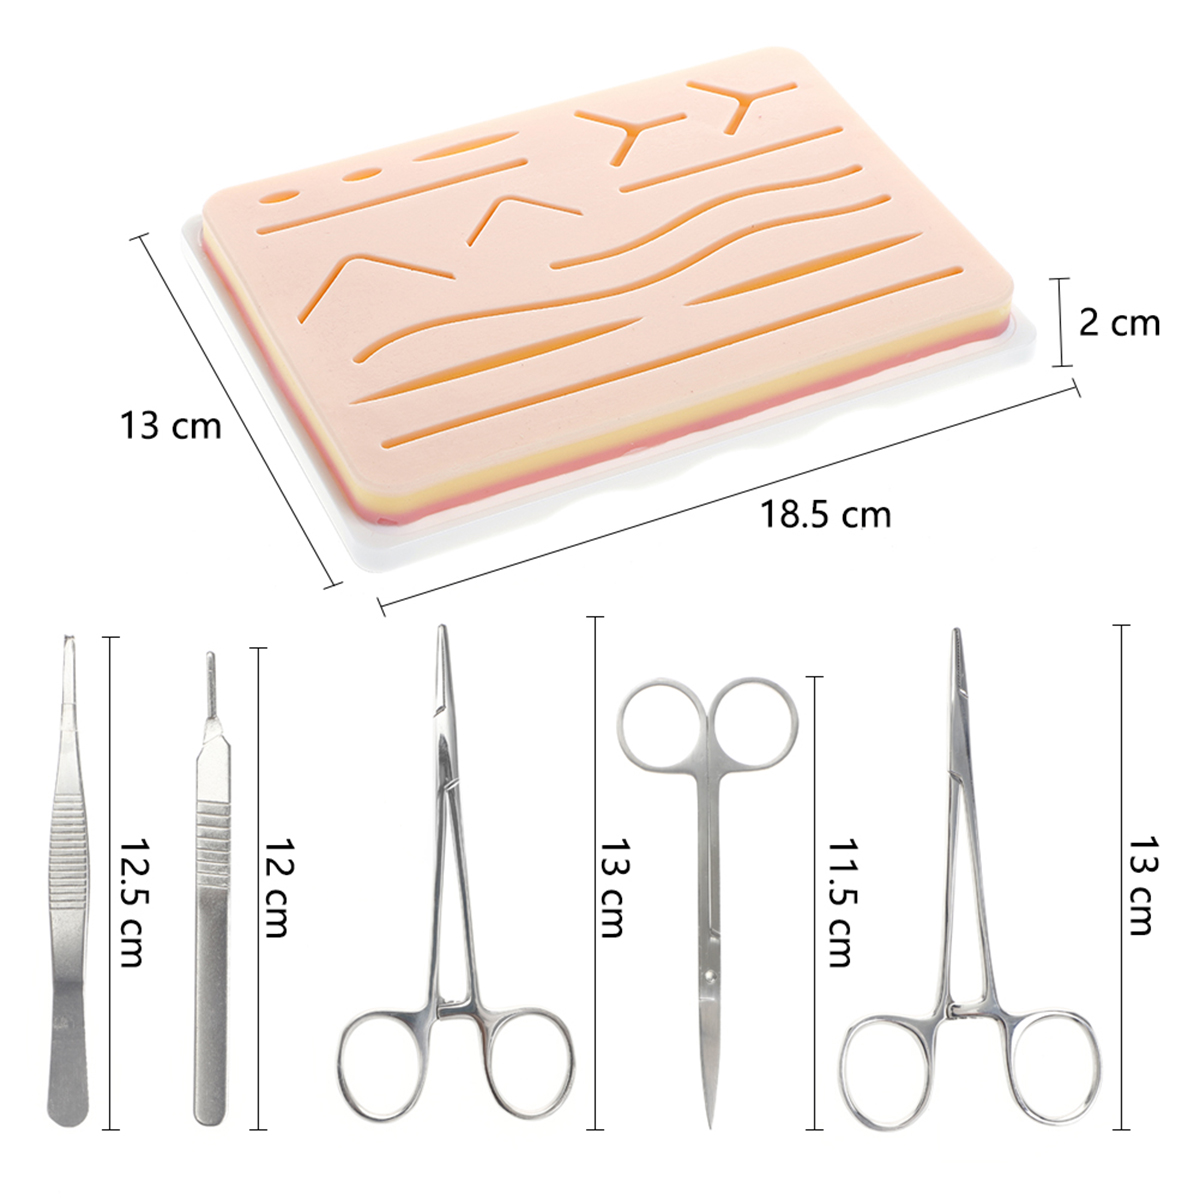 25-In-1-Skin-Suture-Surgical-Training-Kit-Silicone-Pad-Needle-Scissors-Tools-Kit-1417313-6